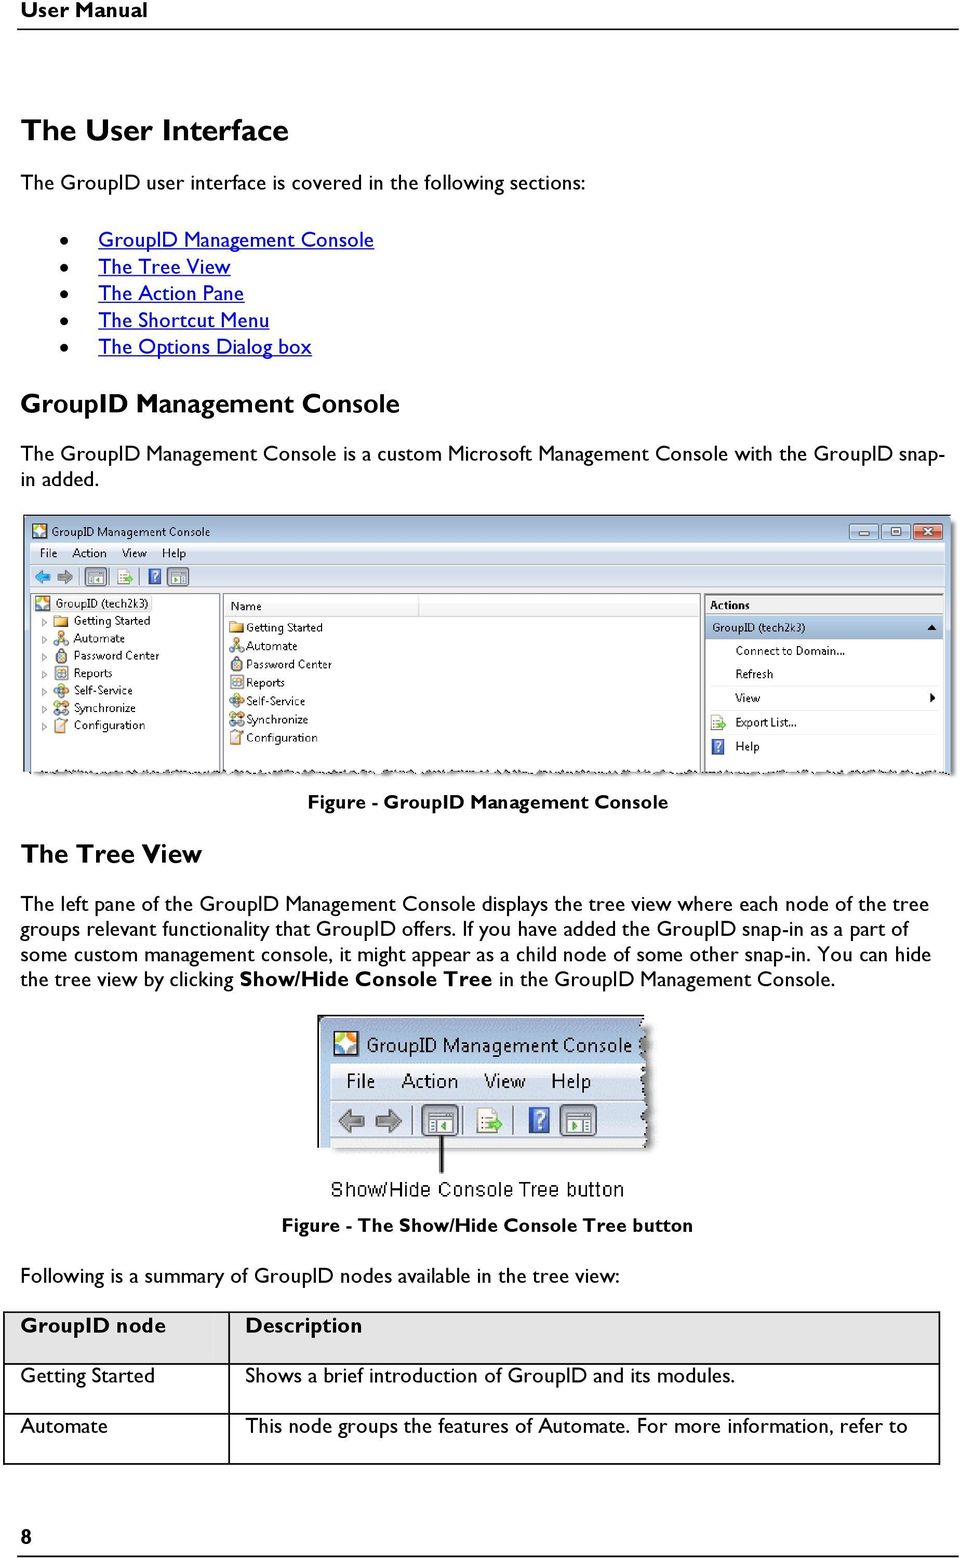 The Tree View Figure - GroupID Management Console The left pane of the GroupID Management Console displays the tree view where each node of the tree groups relevant functionality that GroupID offers.